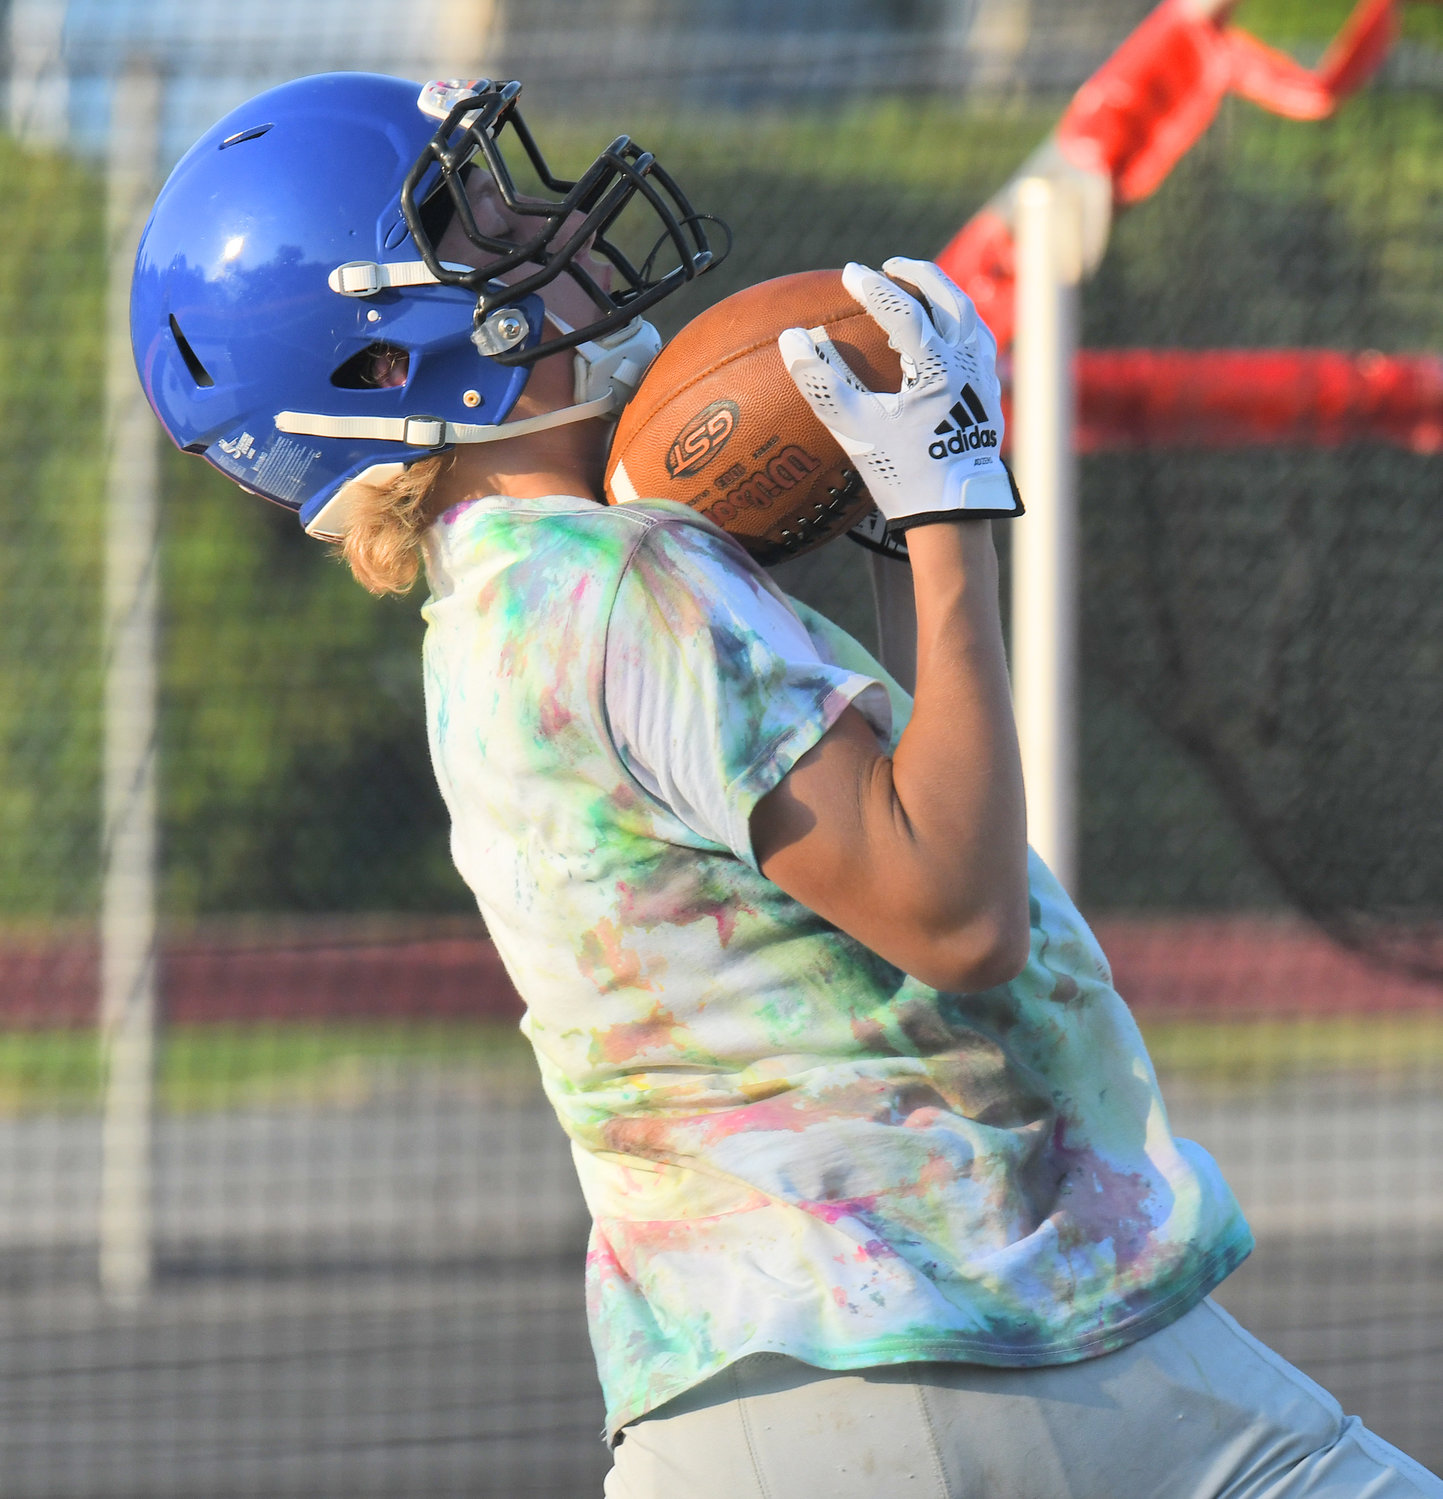 Camden junior running back Trey O'Rourke catches a long pass during a seven-on-seven against Rome Free Academy. O'Rourke will be part of a crowded backfield but the Blue Devils could be able to turn that into an advantage as the team tries to establish a power run game early in the season.